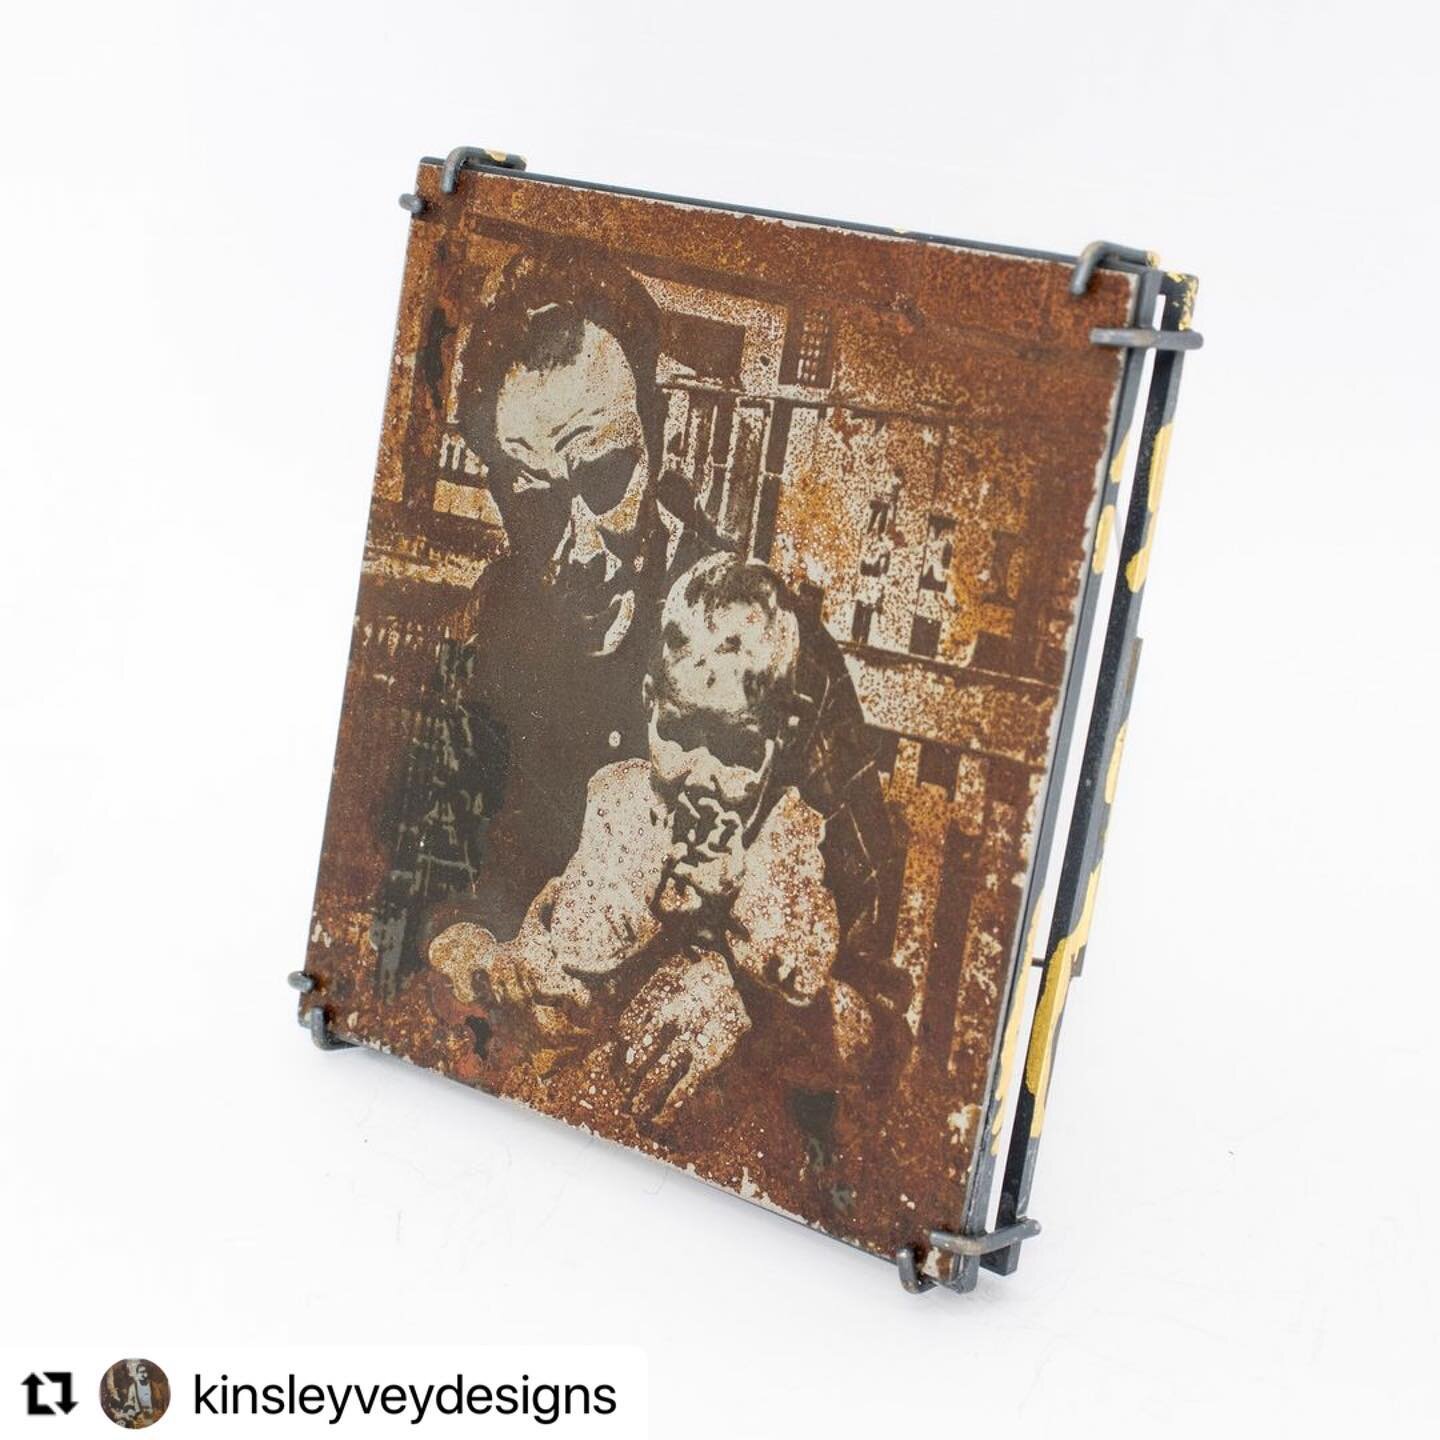 #Repost @kinsleyveydesigns with @use.repost
・・・
I'm very excited to announce that I will be exhibiting at @contemporaniabarcelona this month in Barcelona! September 28th - September 30th

I will be showing a mix of work from my 'Iron Identity' and 'T